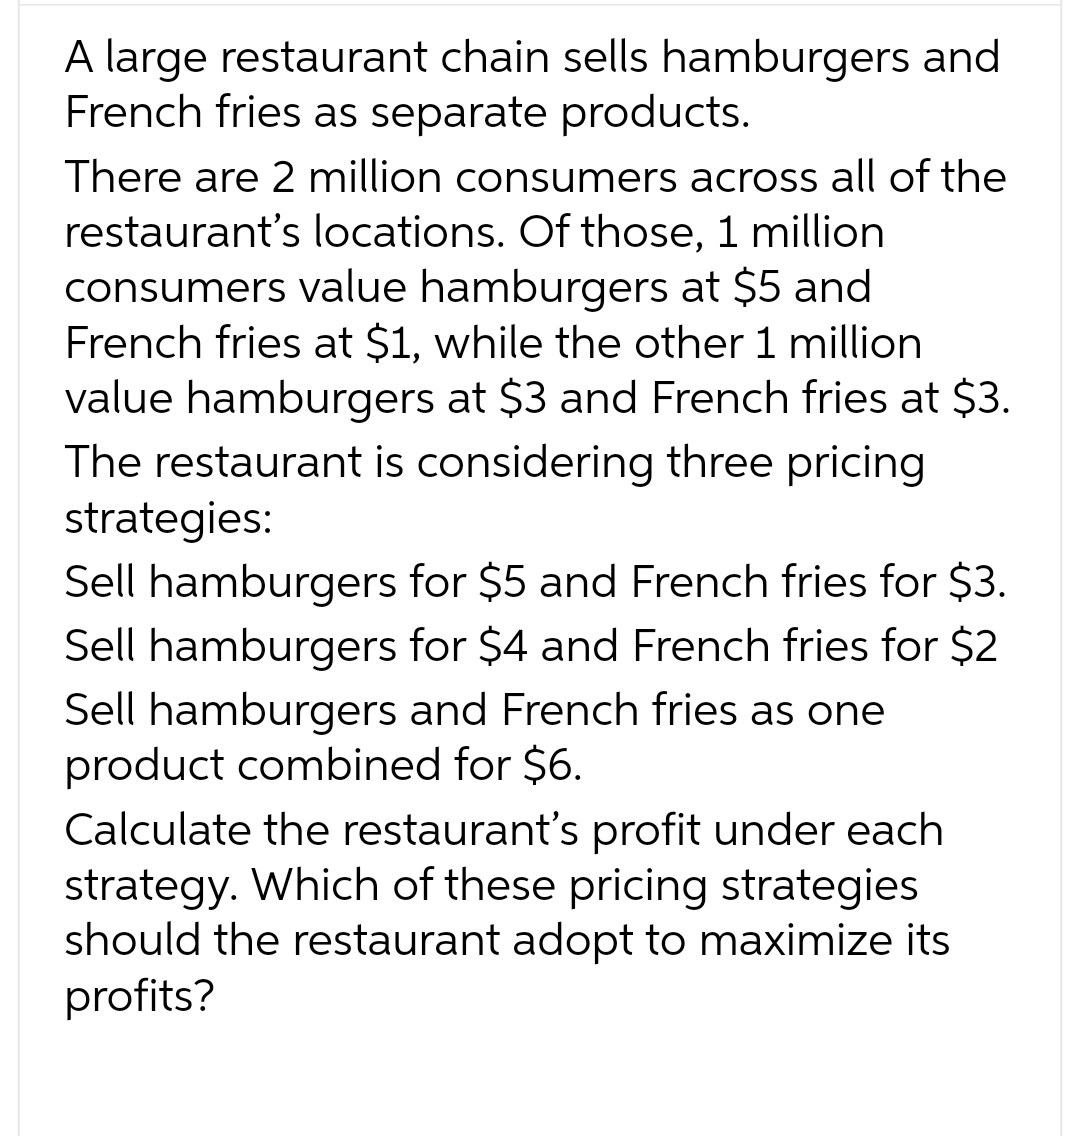 A large restaurant chain sells hamburgers and
French fries as separate products.
There are 2 million consumers across all of the
restaurant's locations. Of those, 1 million
consumers value hamburgers at $5 and
French fries at $1, while the other 1 million
value hamburgers at $3 and French fries at $3.
The restaurant is considering three pricing
strategies:
Sell hamburgers for $5 and French fries for $3.
Sell hamburgers for $4 and French fries for $2
Sell hamburgers and French fries as one
product combined for $6.
Calculate the restaurant's profit under each
strategy. Which of these pricing strategies
should the restaurant adopt to maximize its
profits?